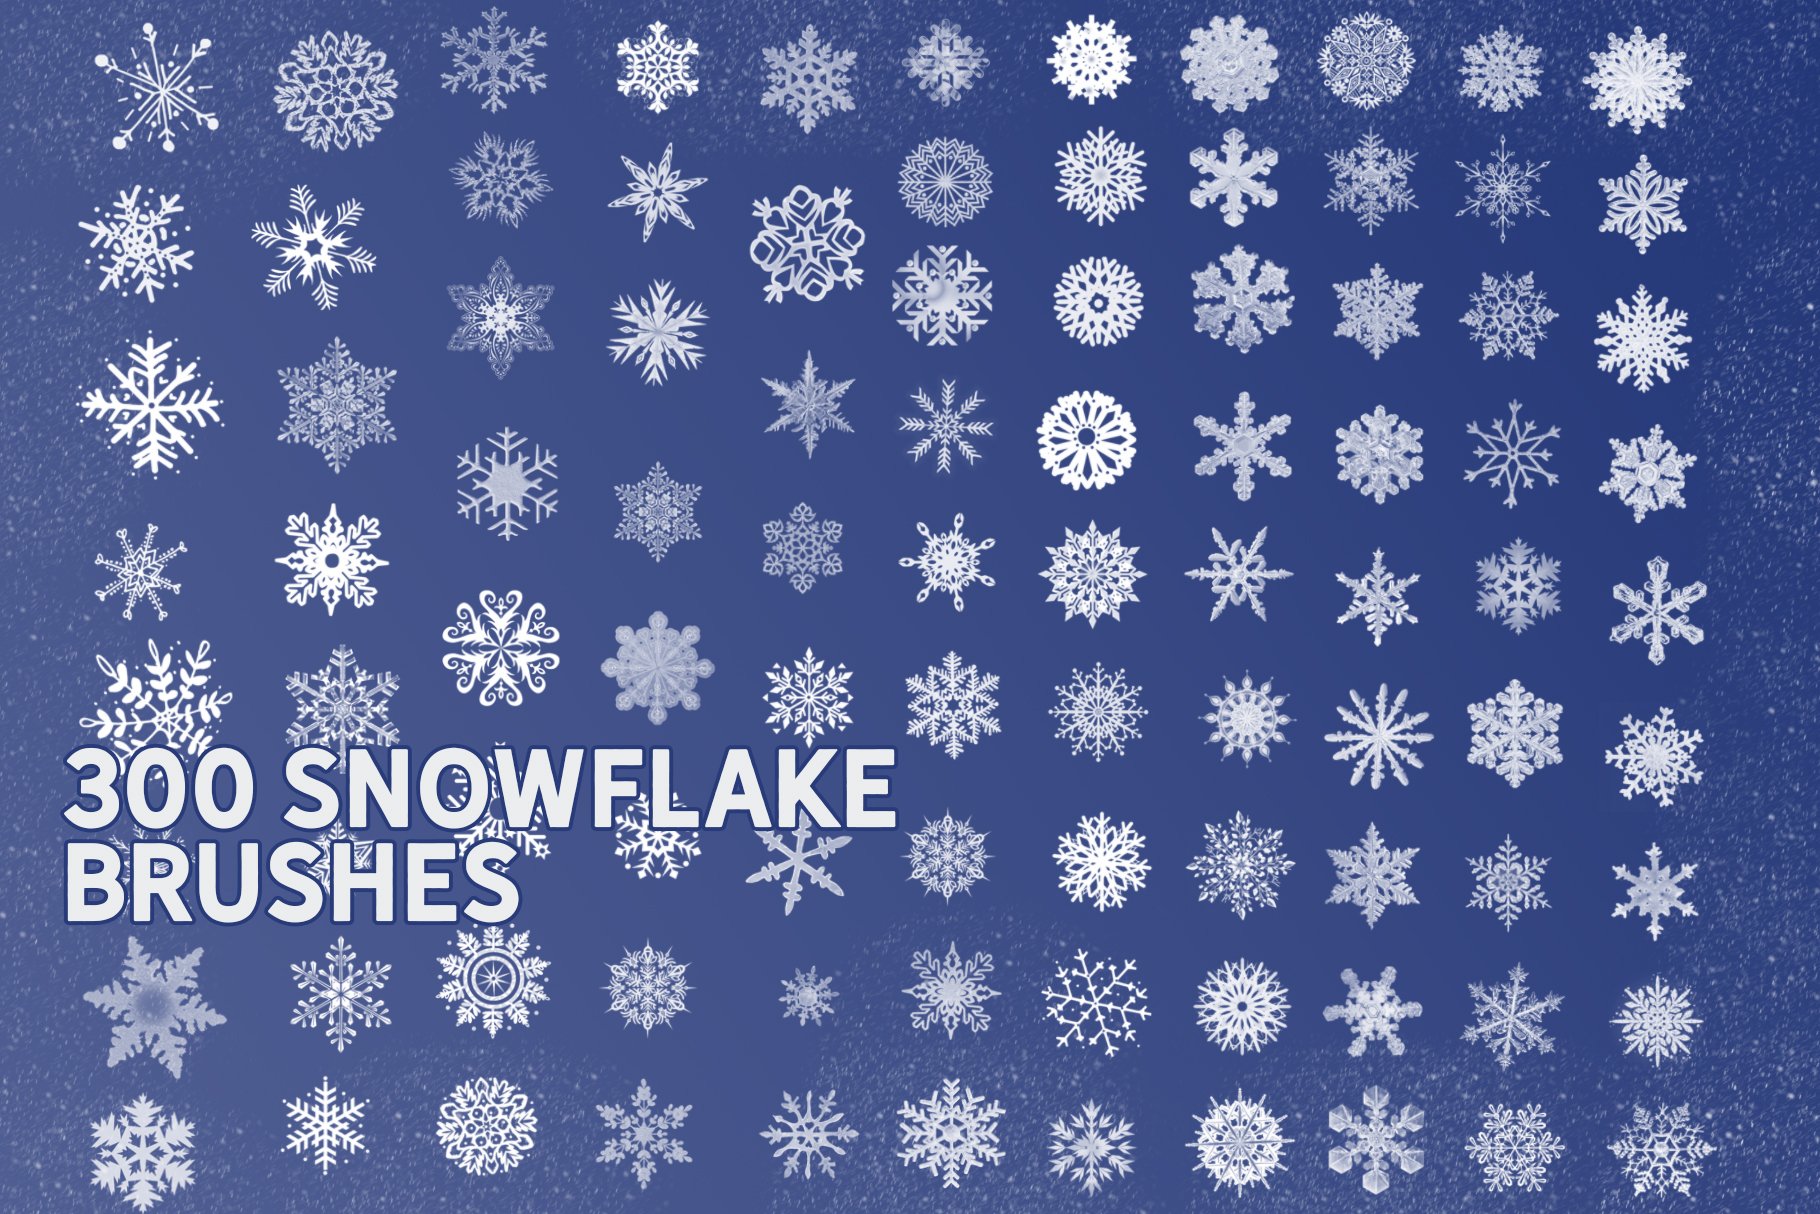 SNOWFLAKES BRUSHES & FREE OVERLAYSpreview image.